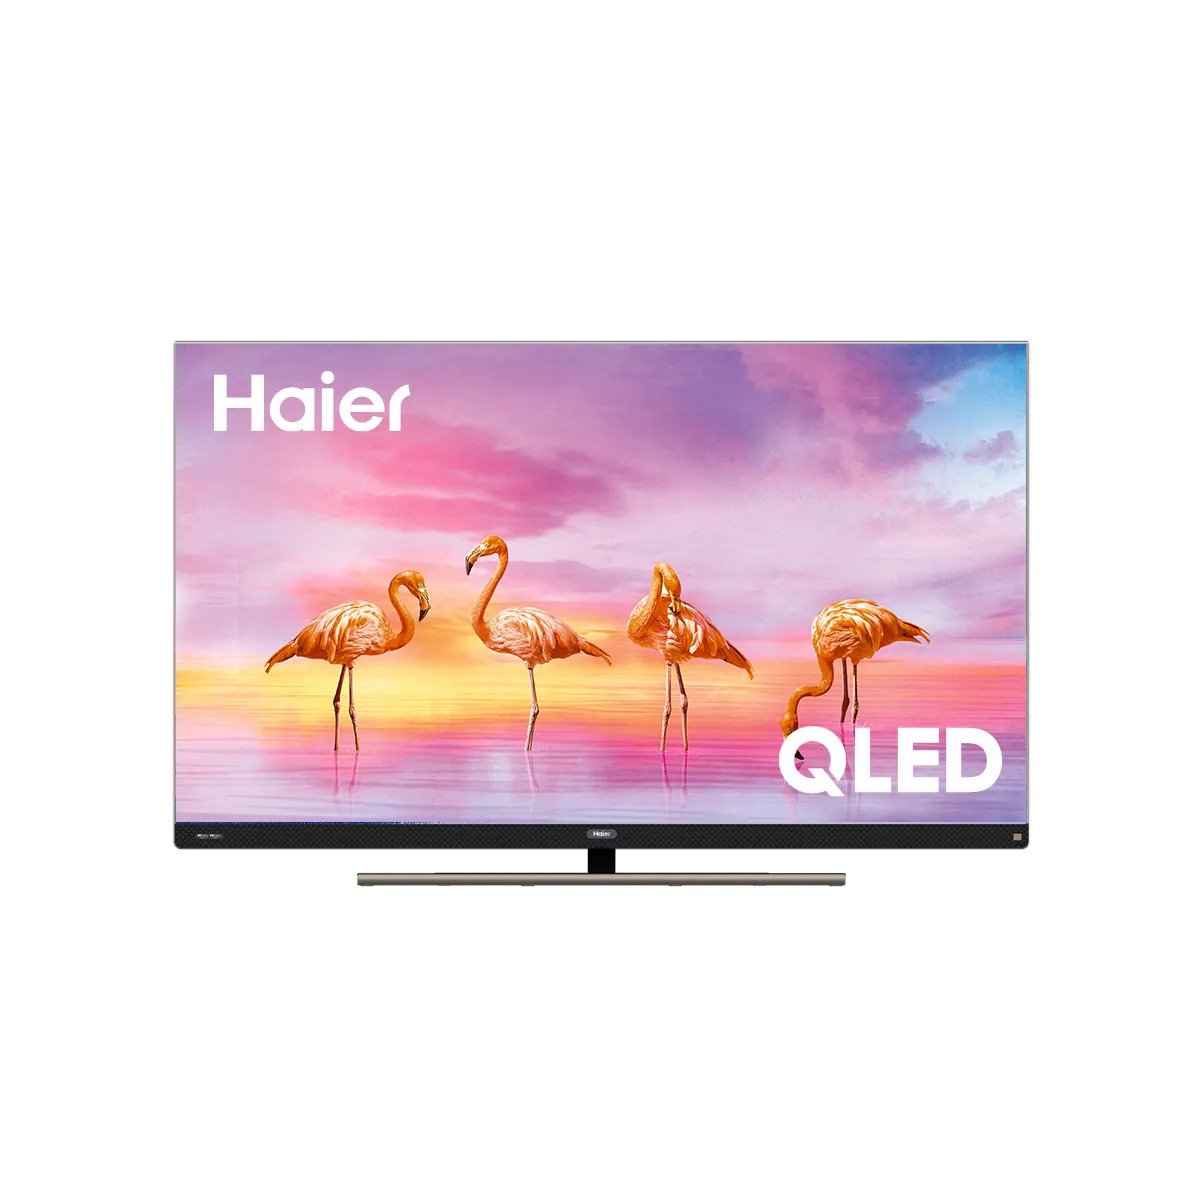 Haier 55 Inch Smart TV, QLED 4K HDR UHD 120Hz GOOGLE TV, With Dolby Vision - H55S900UX